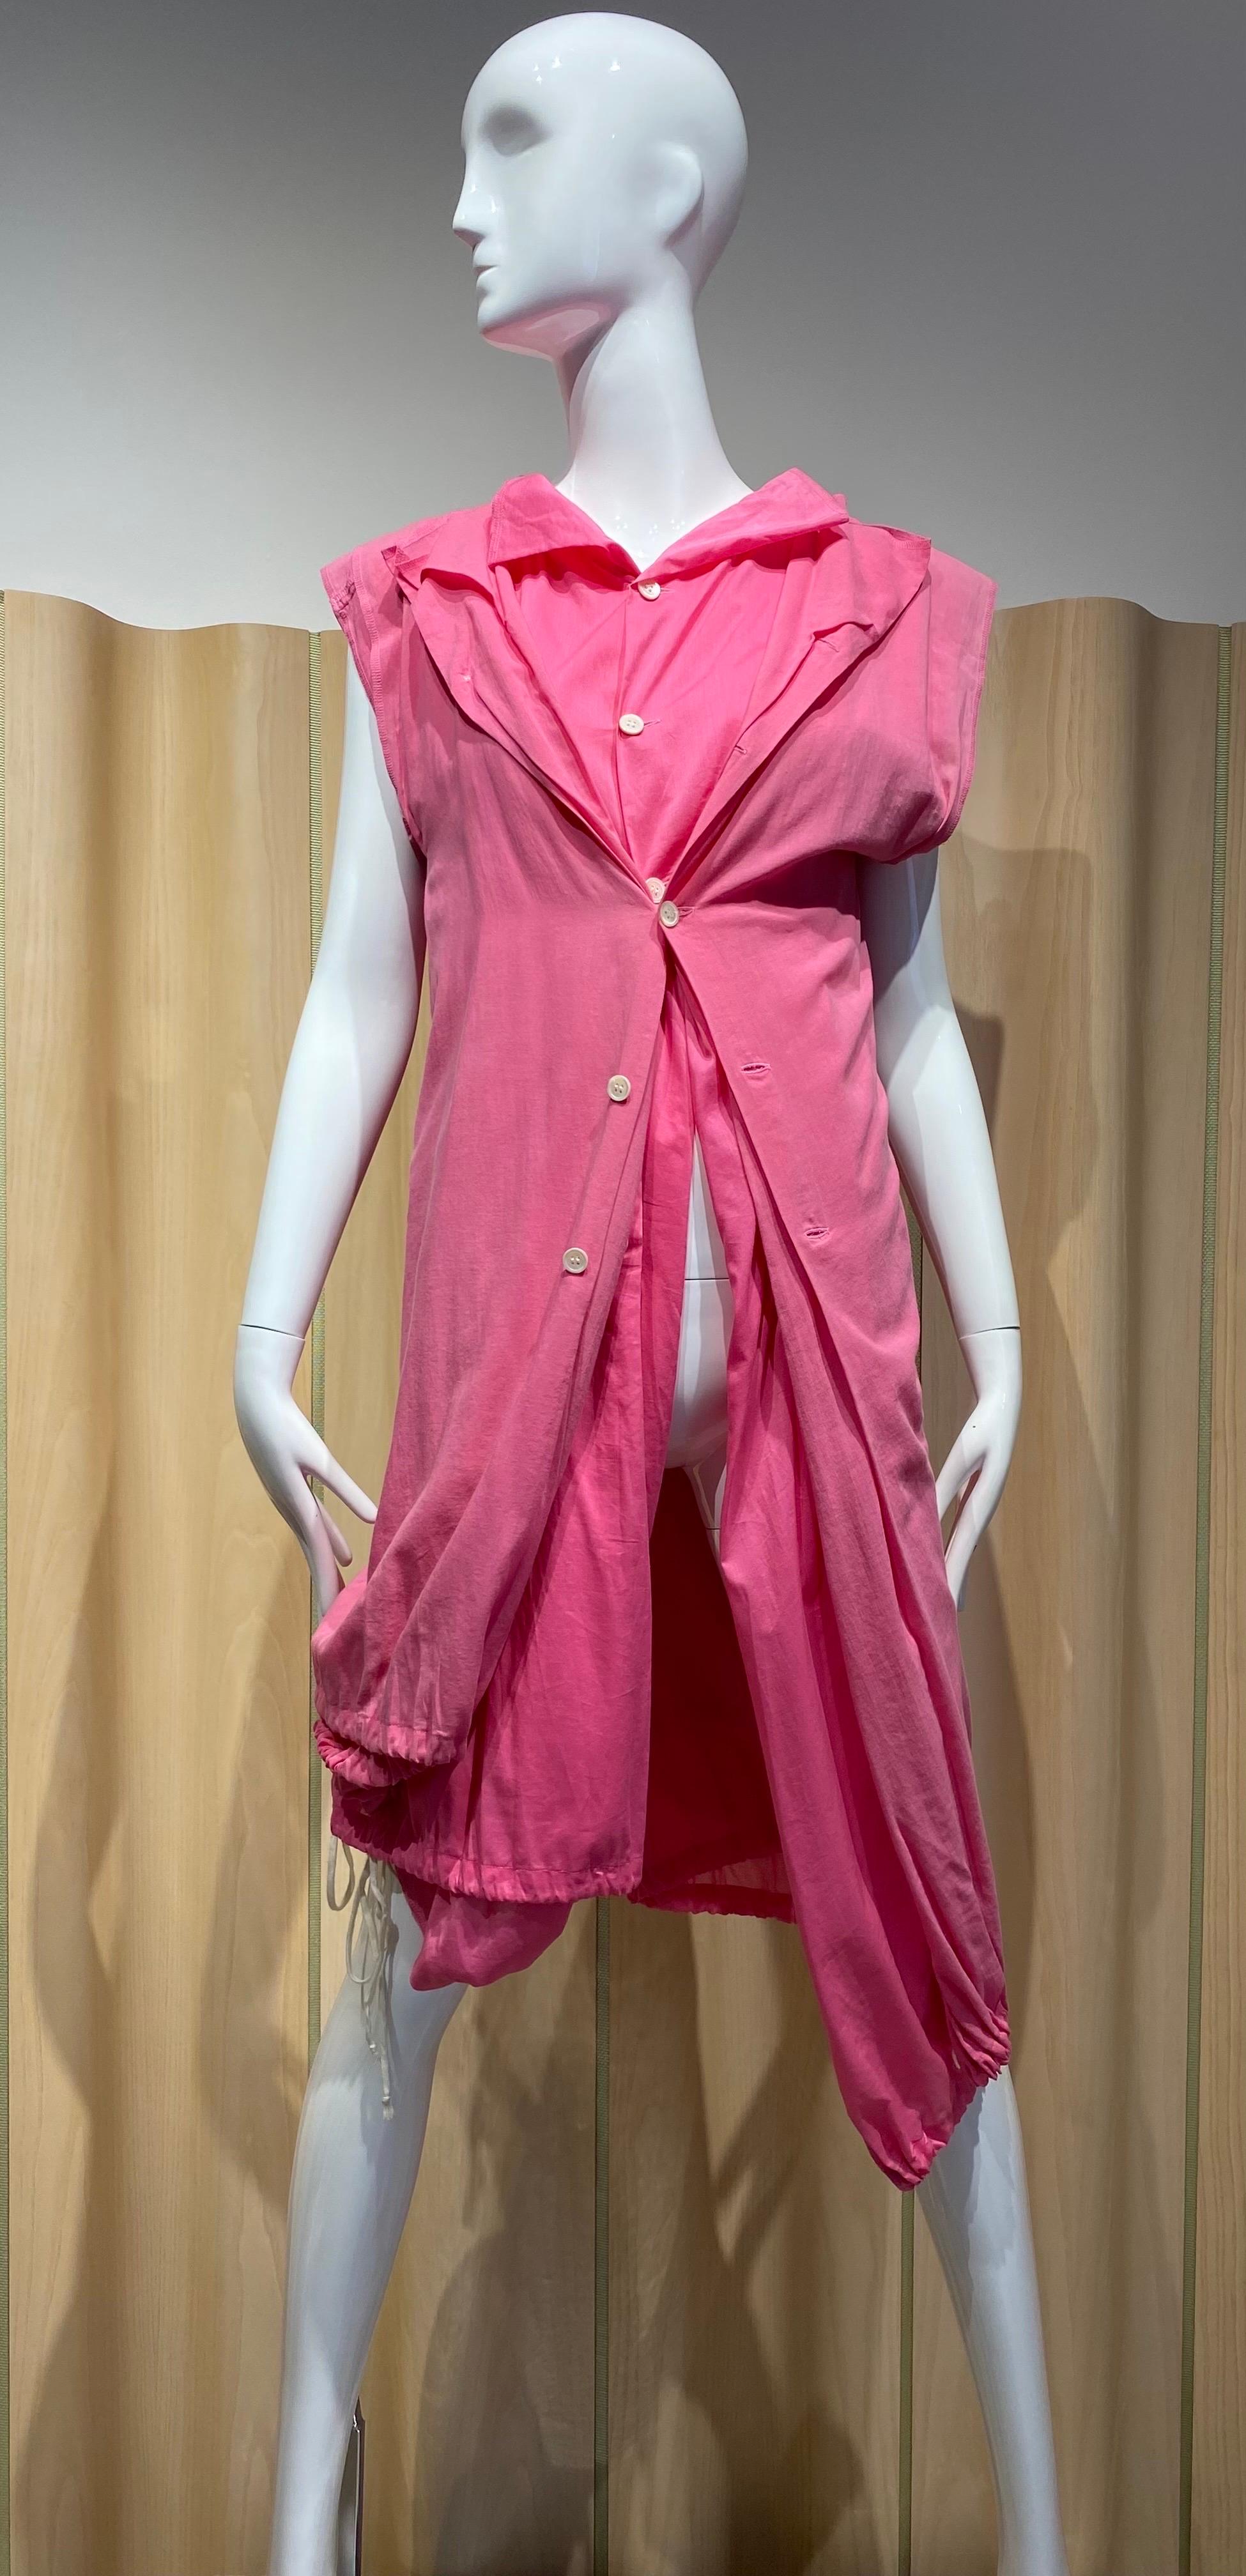 2007 Comme Des Garcons buble gum pink cotton double layer shirt vest top In Good Condition For Sale In Beverly Hills, CA